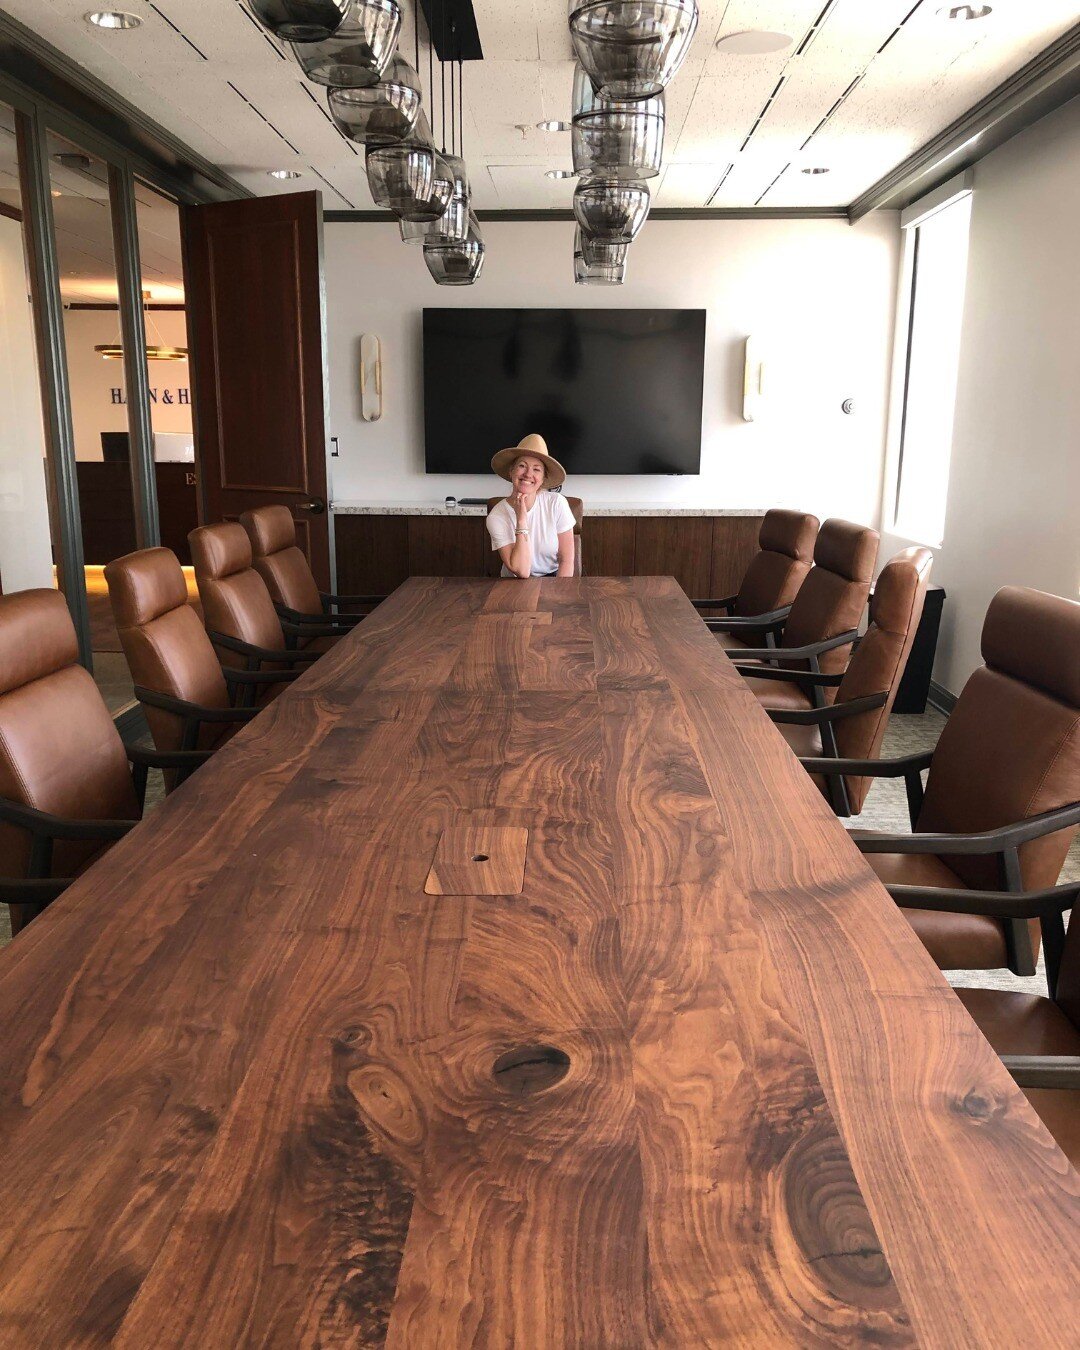 We are so excited to start sharing photos of our largest project to date - a Pasadena Law Firm that hadn't been renovated since the 1980s! We worked closely with our clients, contractors and tradespeople to ensure that the firm's sense of history and